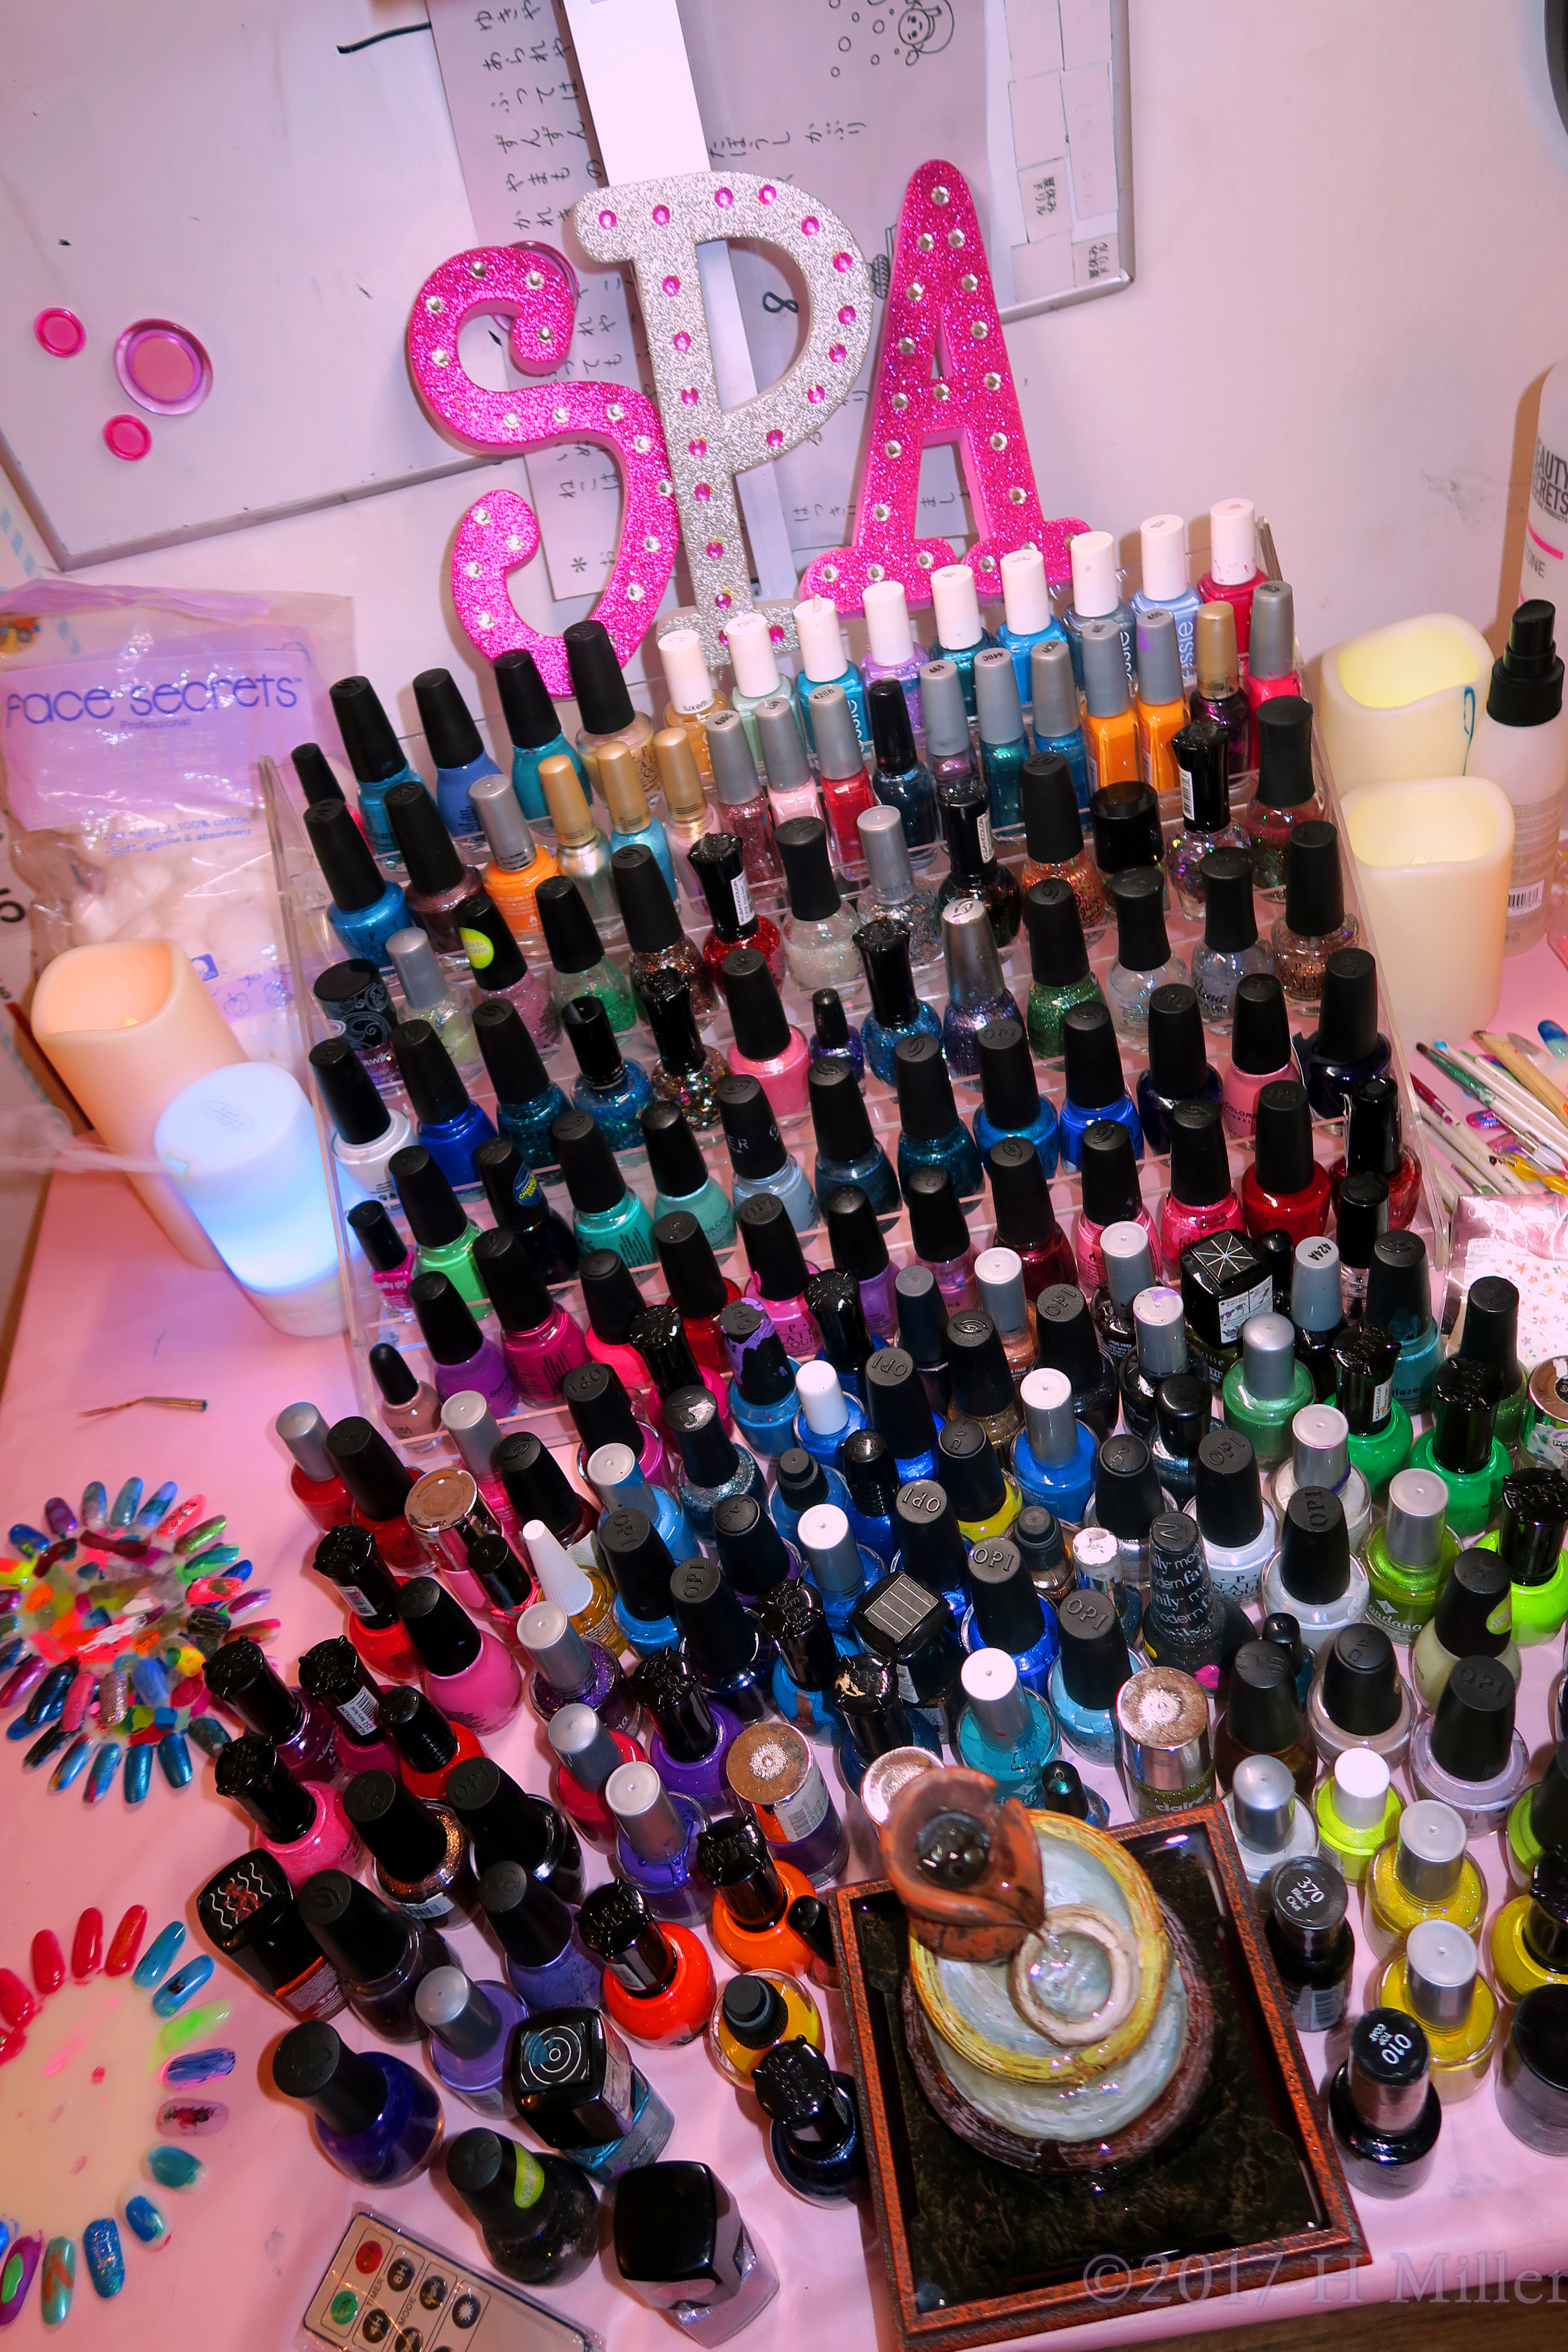 The Kids Nail Spa Contains Such A Colorful Selection Of Nail Polish! 